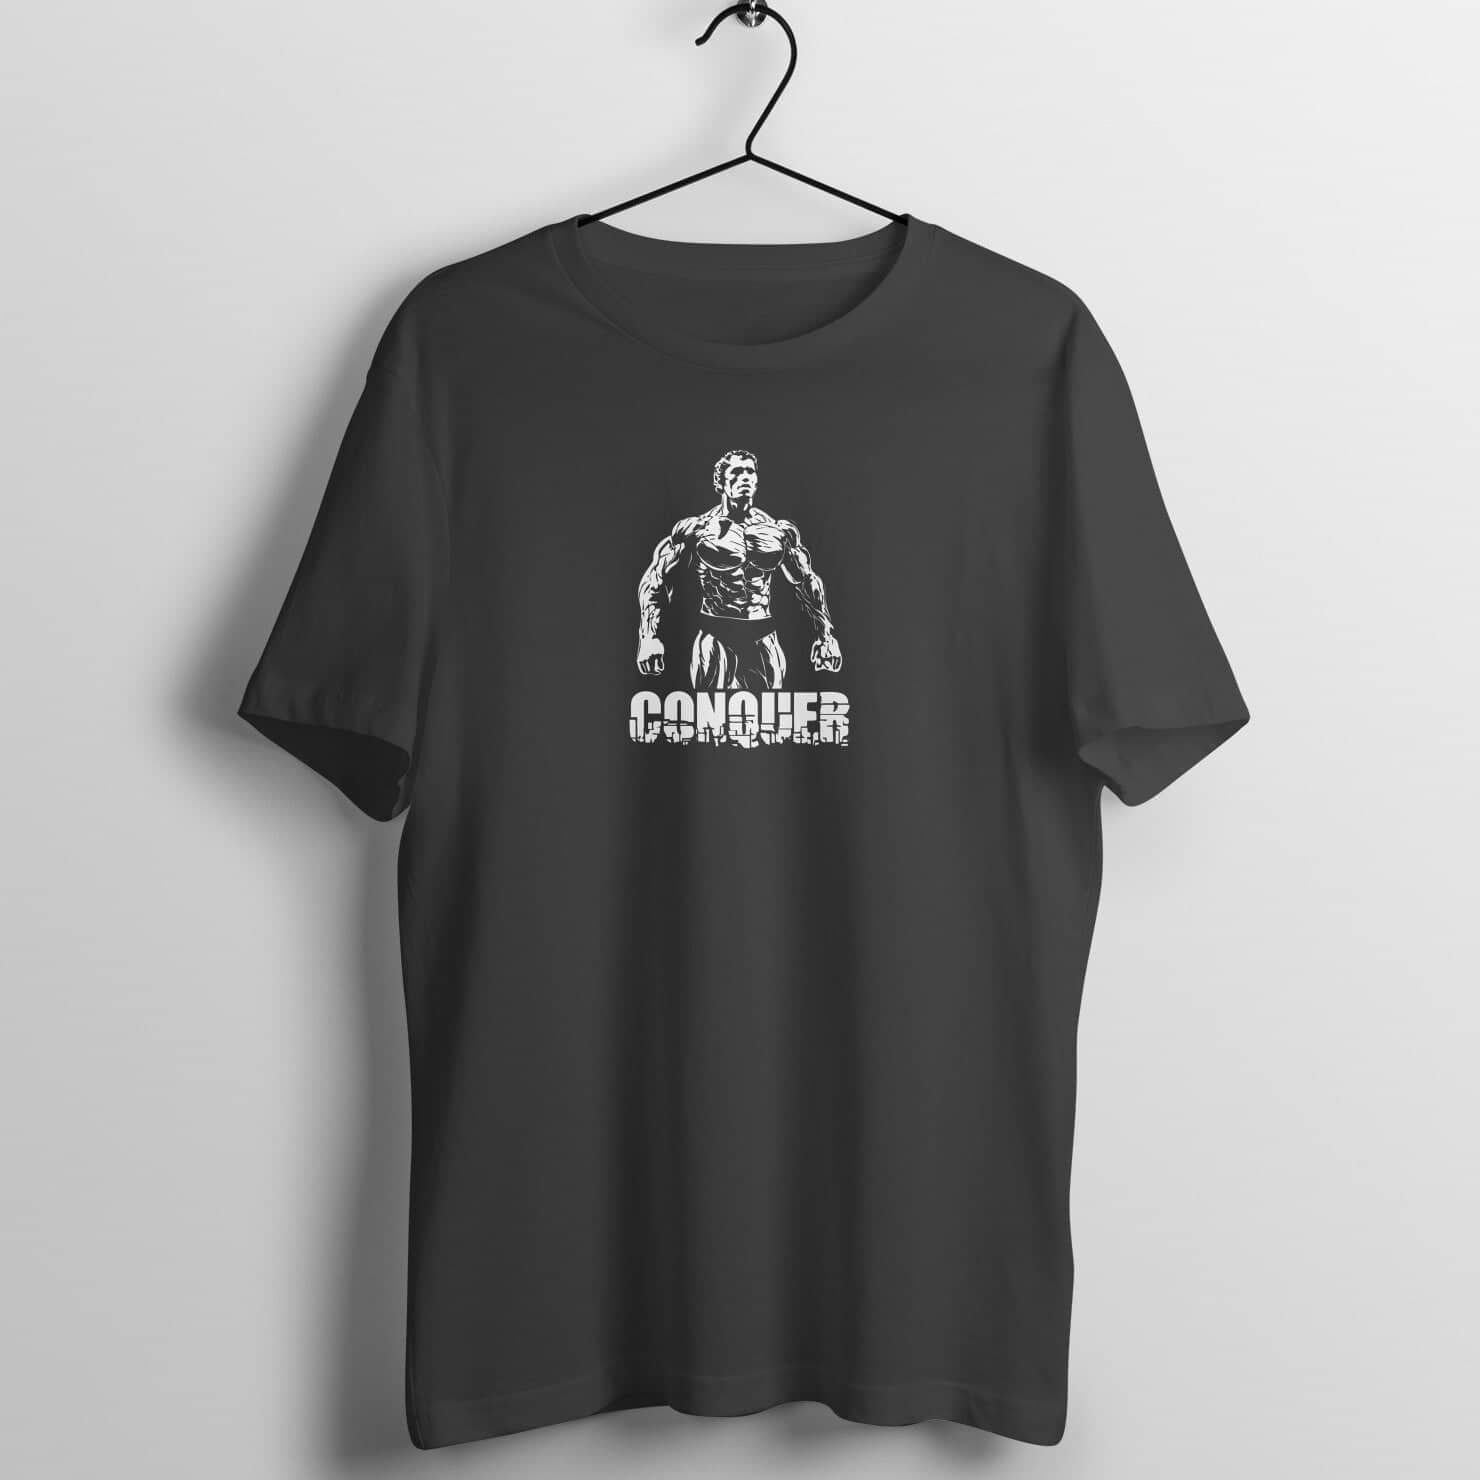 Conquer Exclusive Arnold's Black Gym T Shirt for Men freeshipping - Catch My Drift India